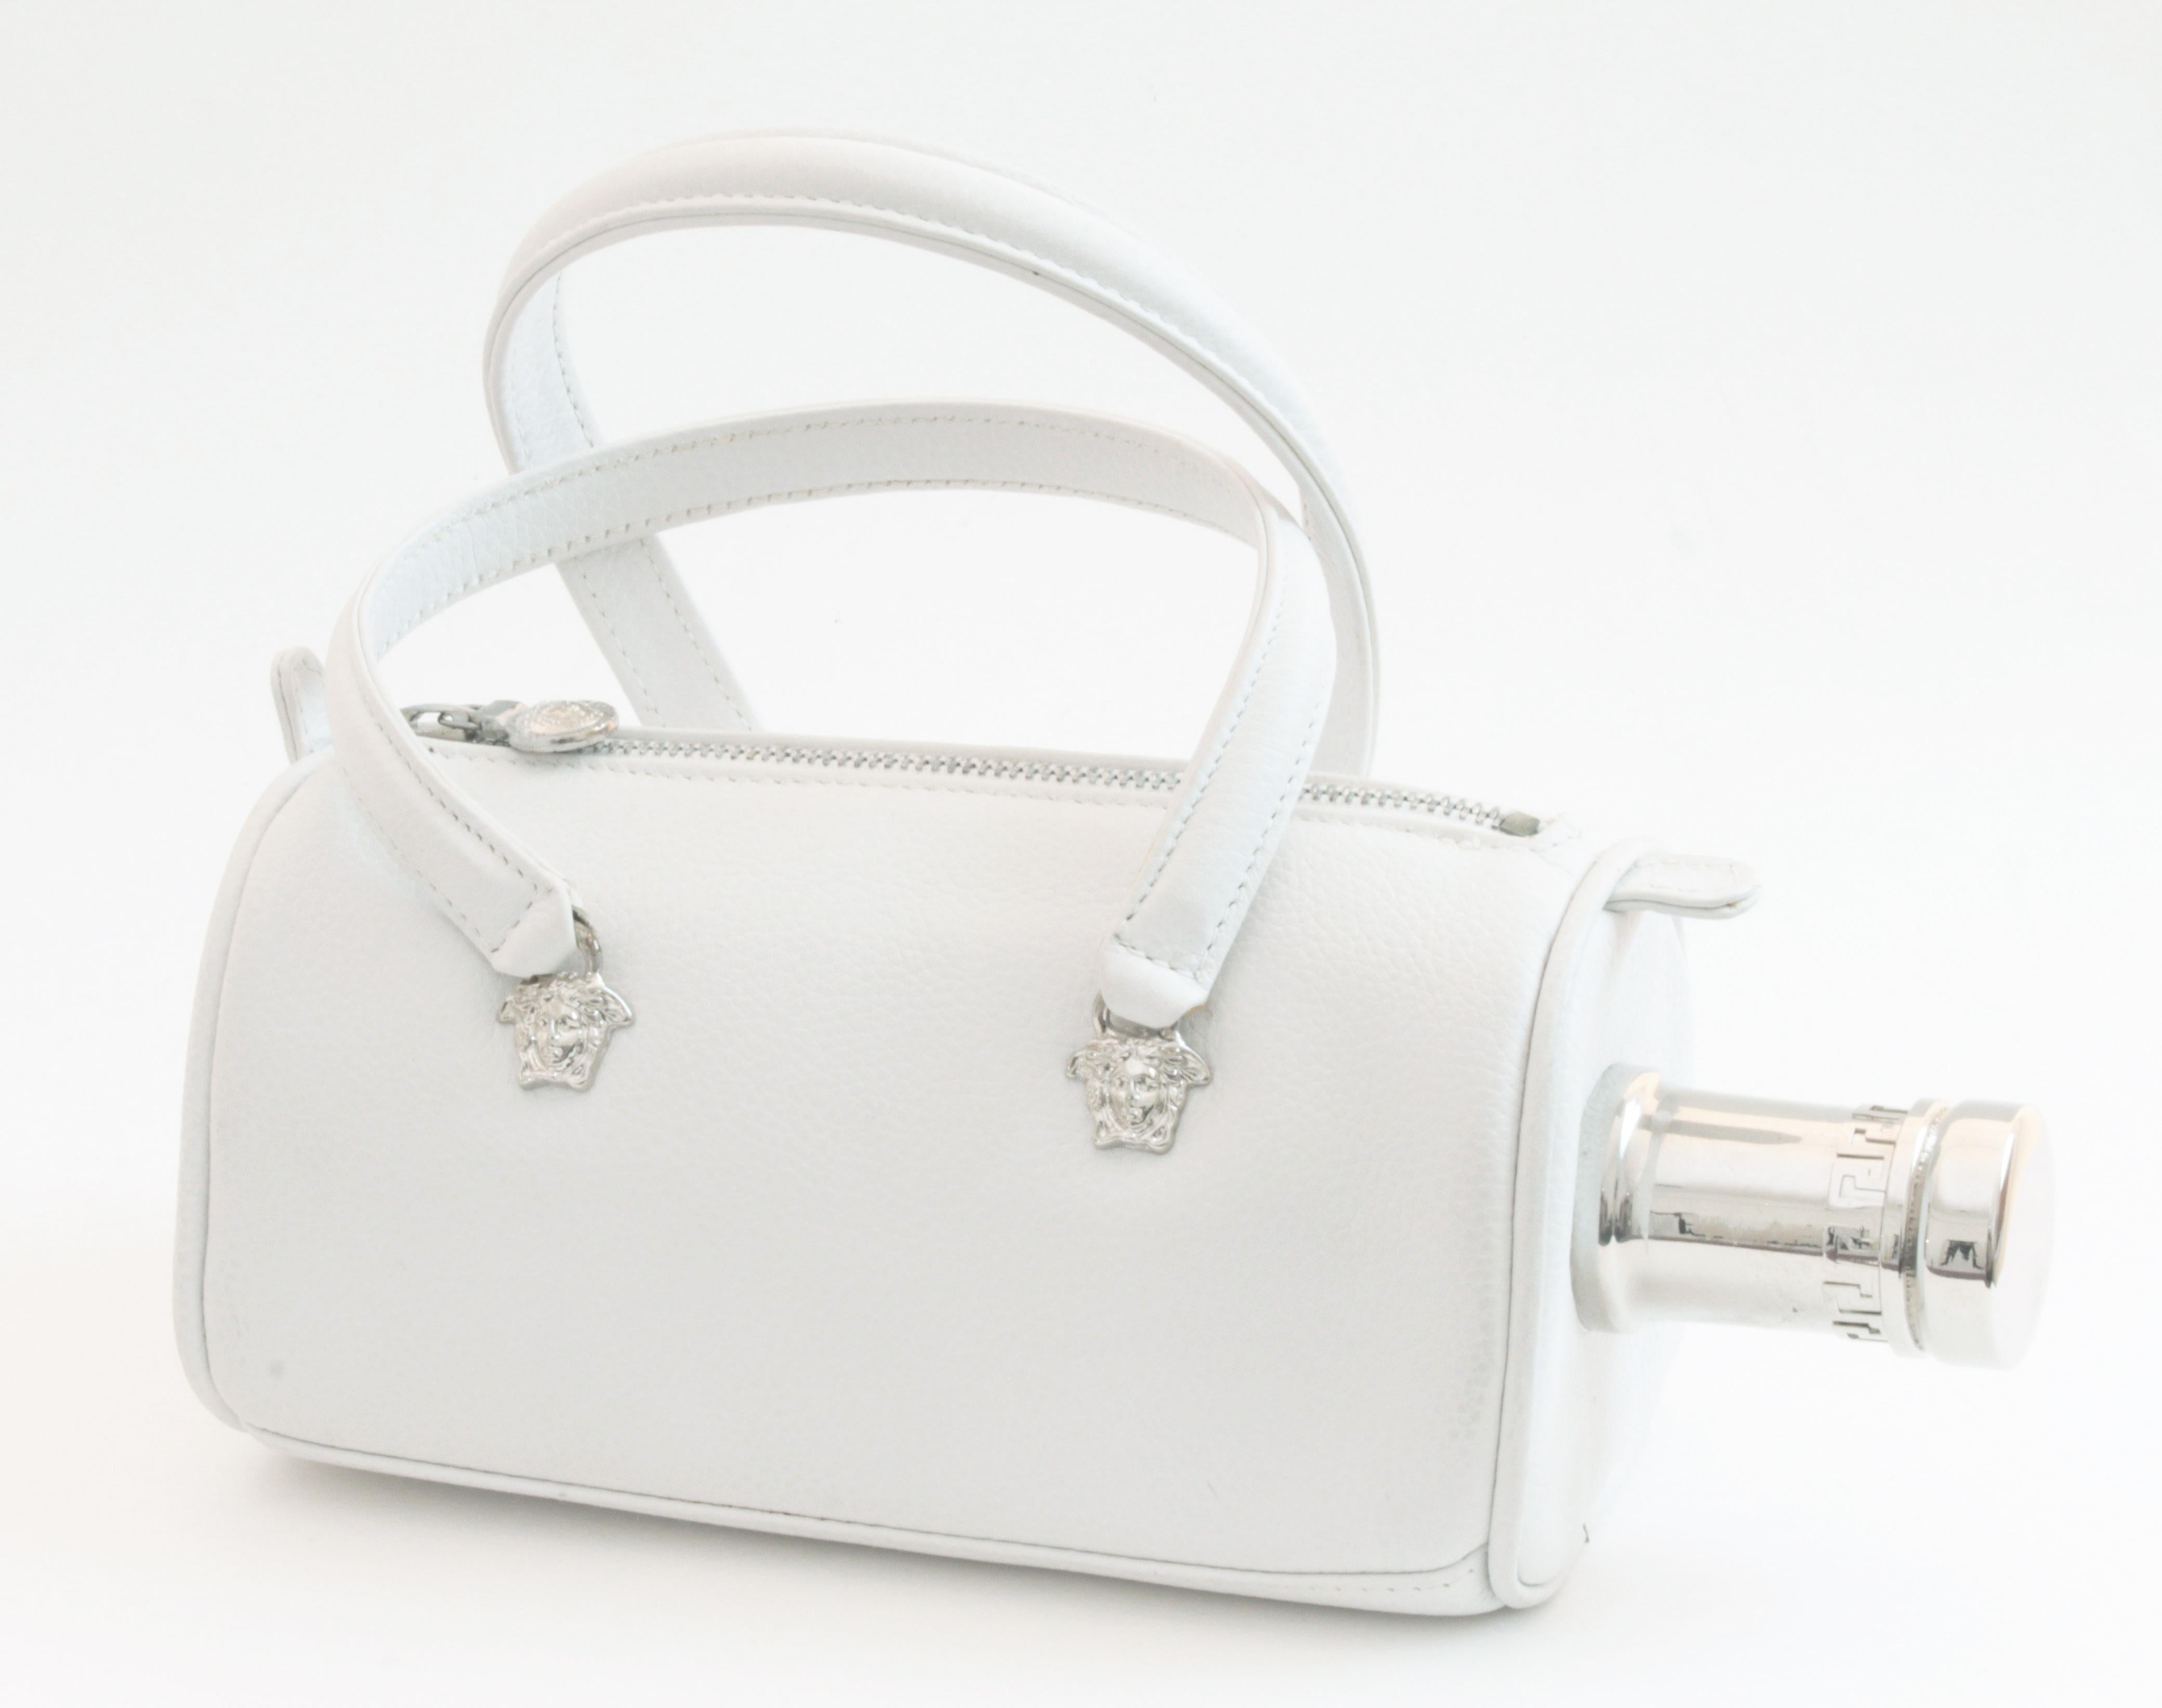 For the true Versace collector! This incredible mini tote was made by Versace Couture for the Absolut Versace ad campaign in 1997.  Made from supple white leather, it features silver Medusa hardware at each handle base and on the zip pull, and a